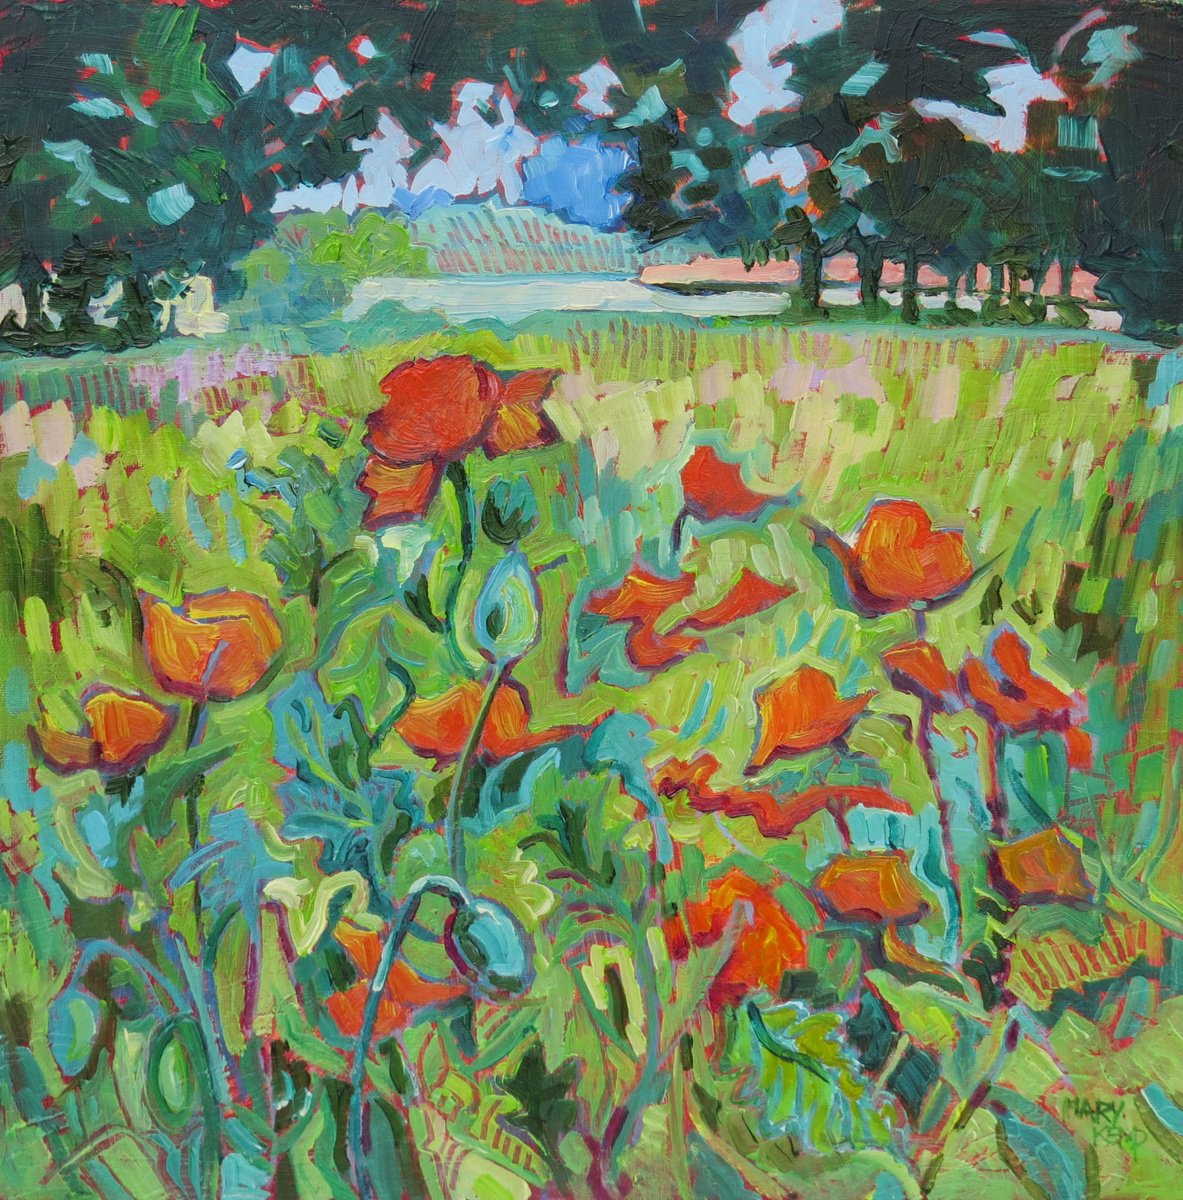 Tangled Poppies, Woodland Clearing by Mary Kemp